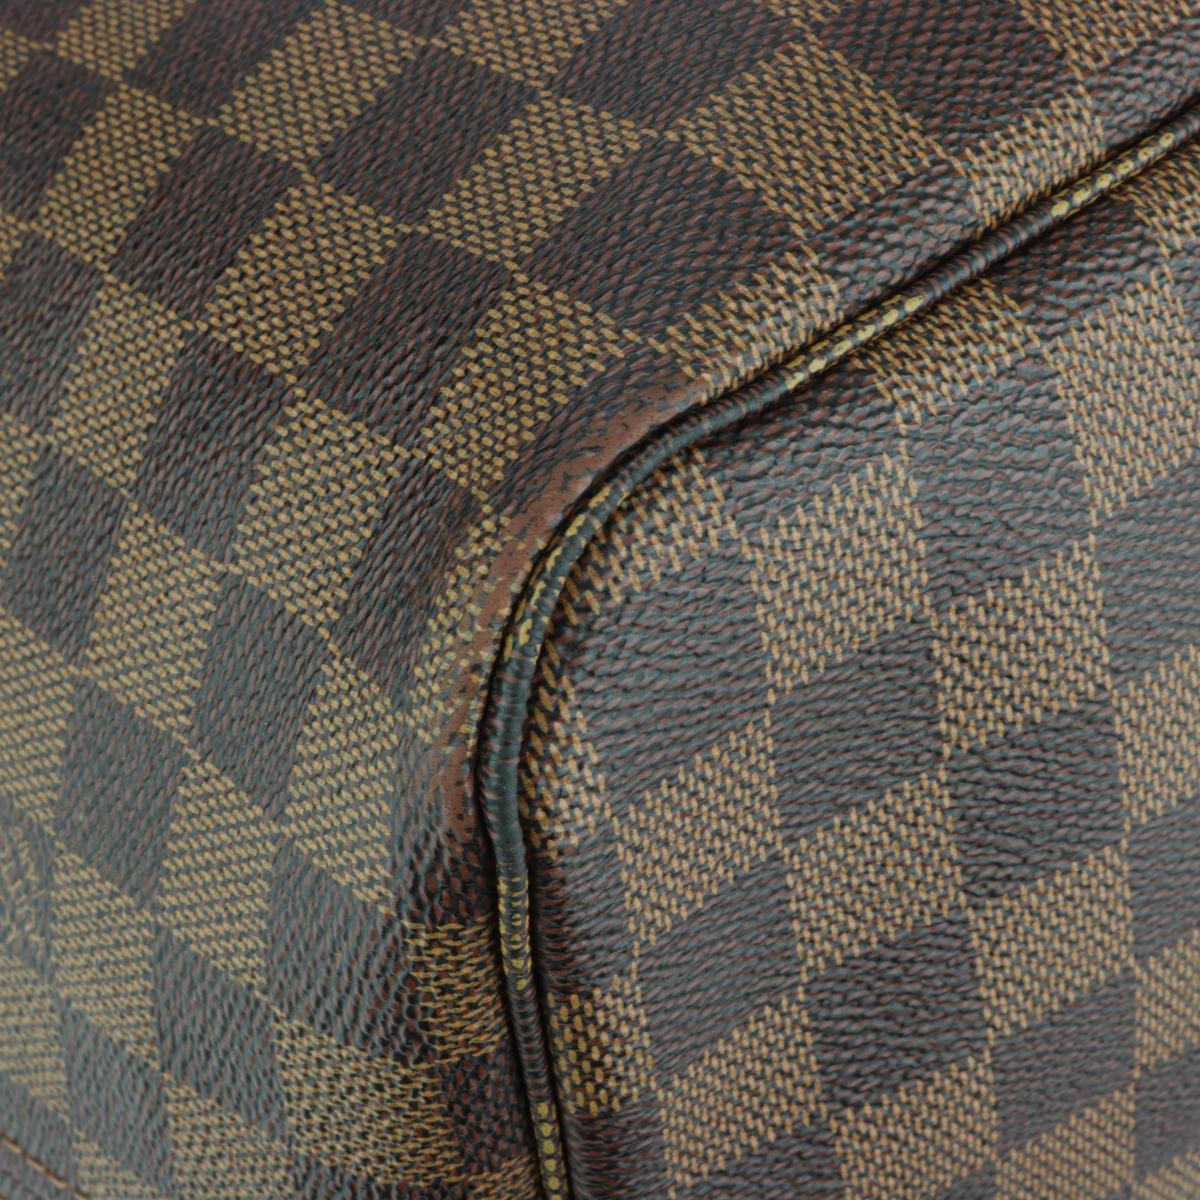 Louis Vuitton Neverfull GM Bag in Damier Ebène with Cherry Red Interior 2015 3